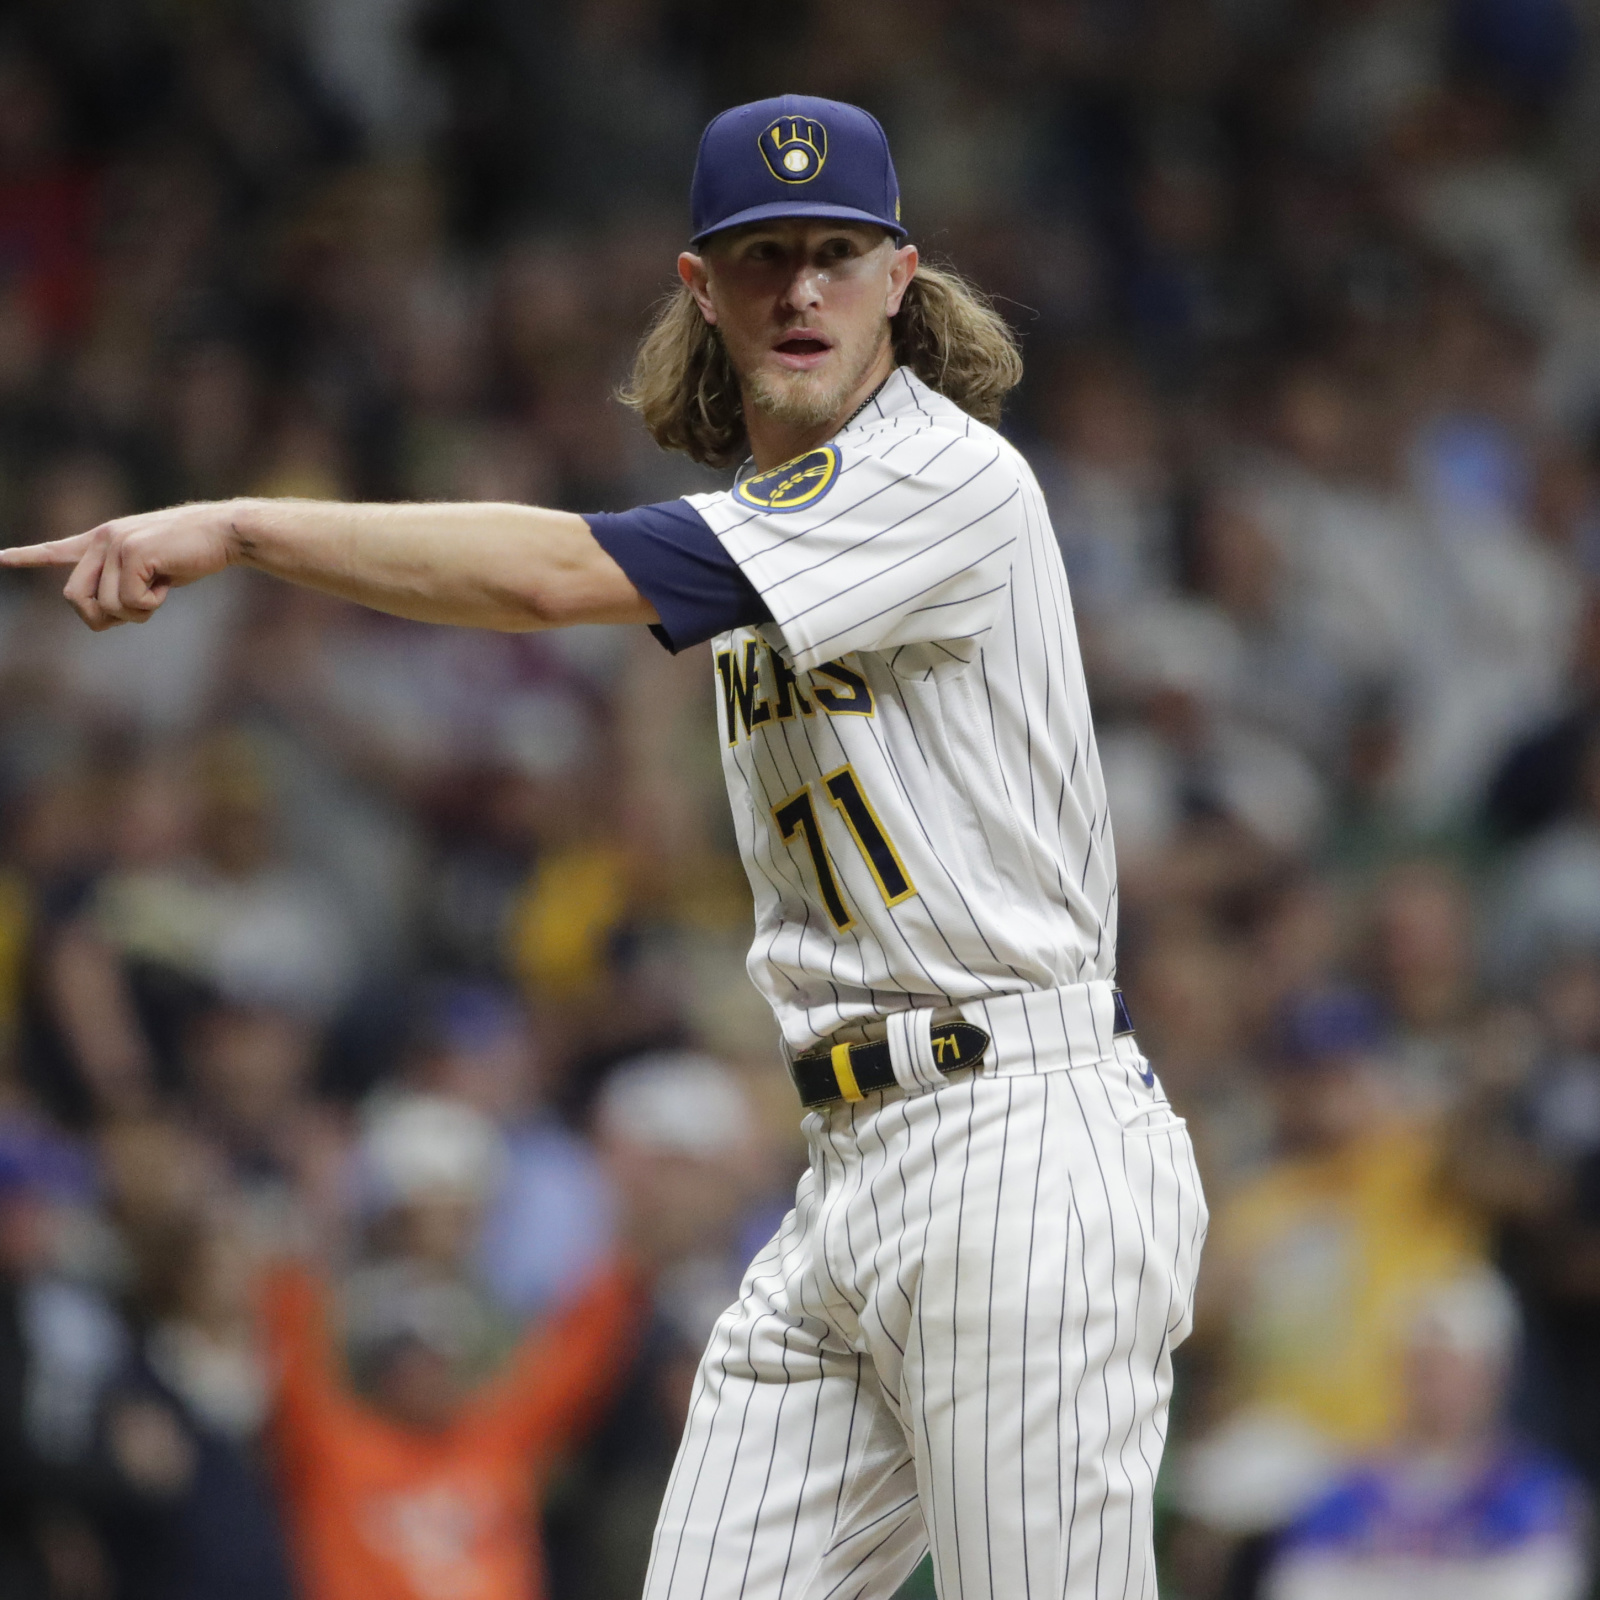 Is it time for the Brewers to move on from Josh Hader?